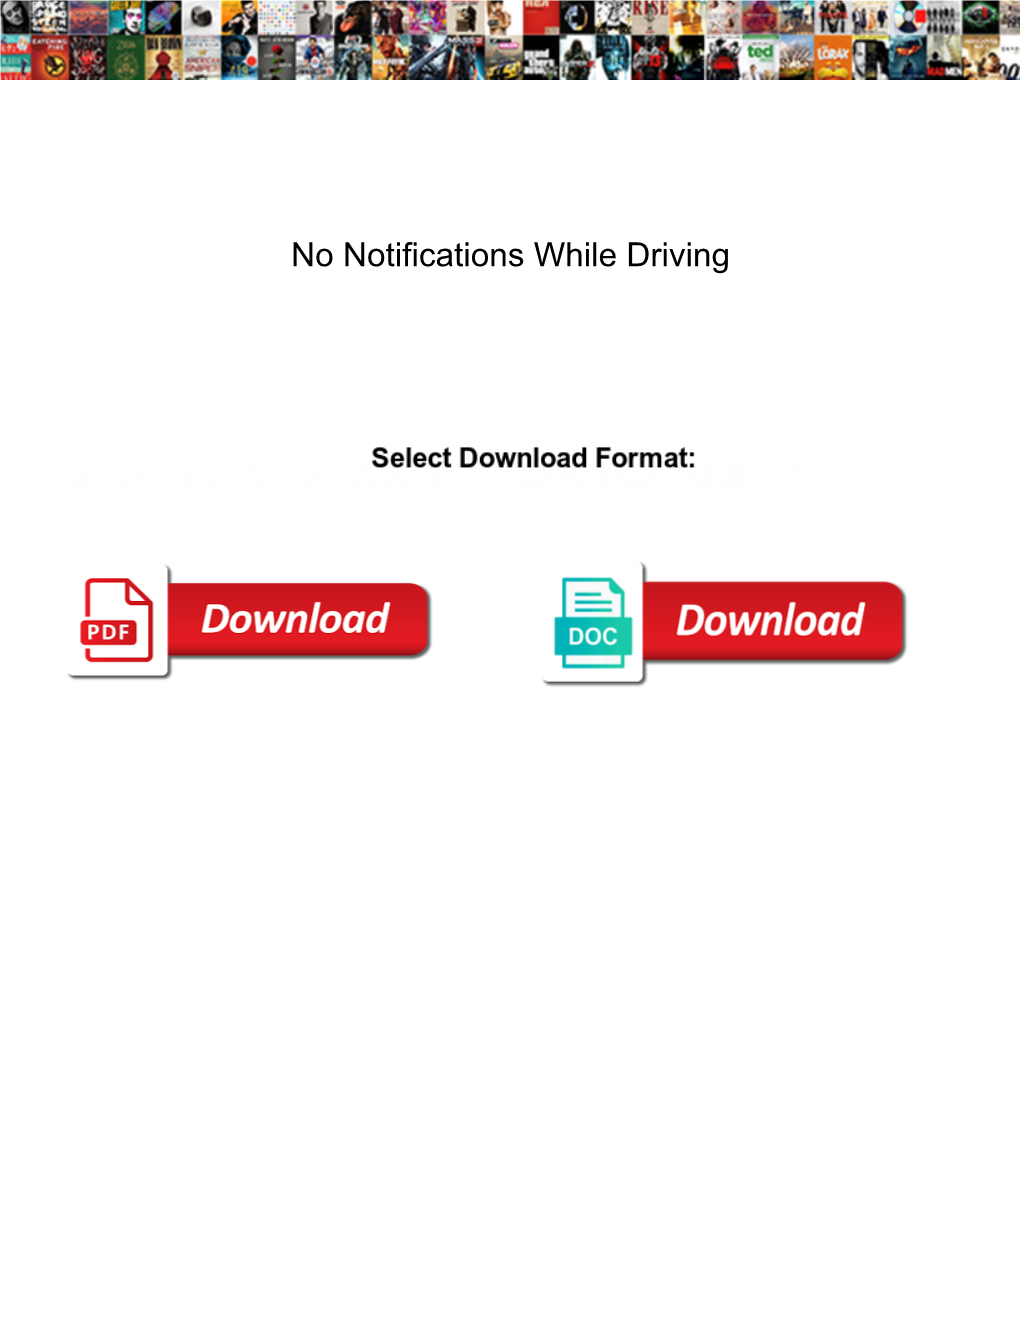 No Notifications While Driving